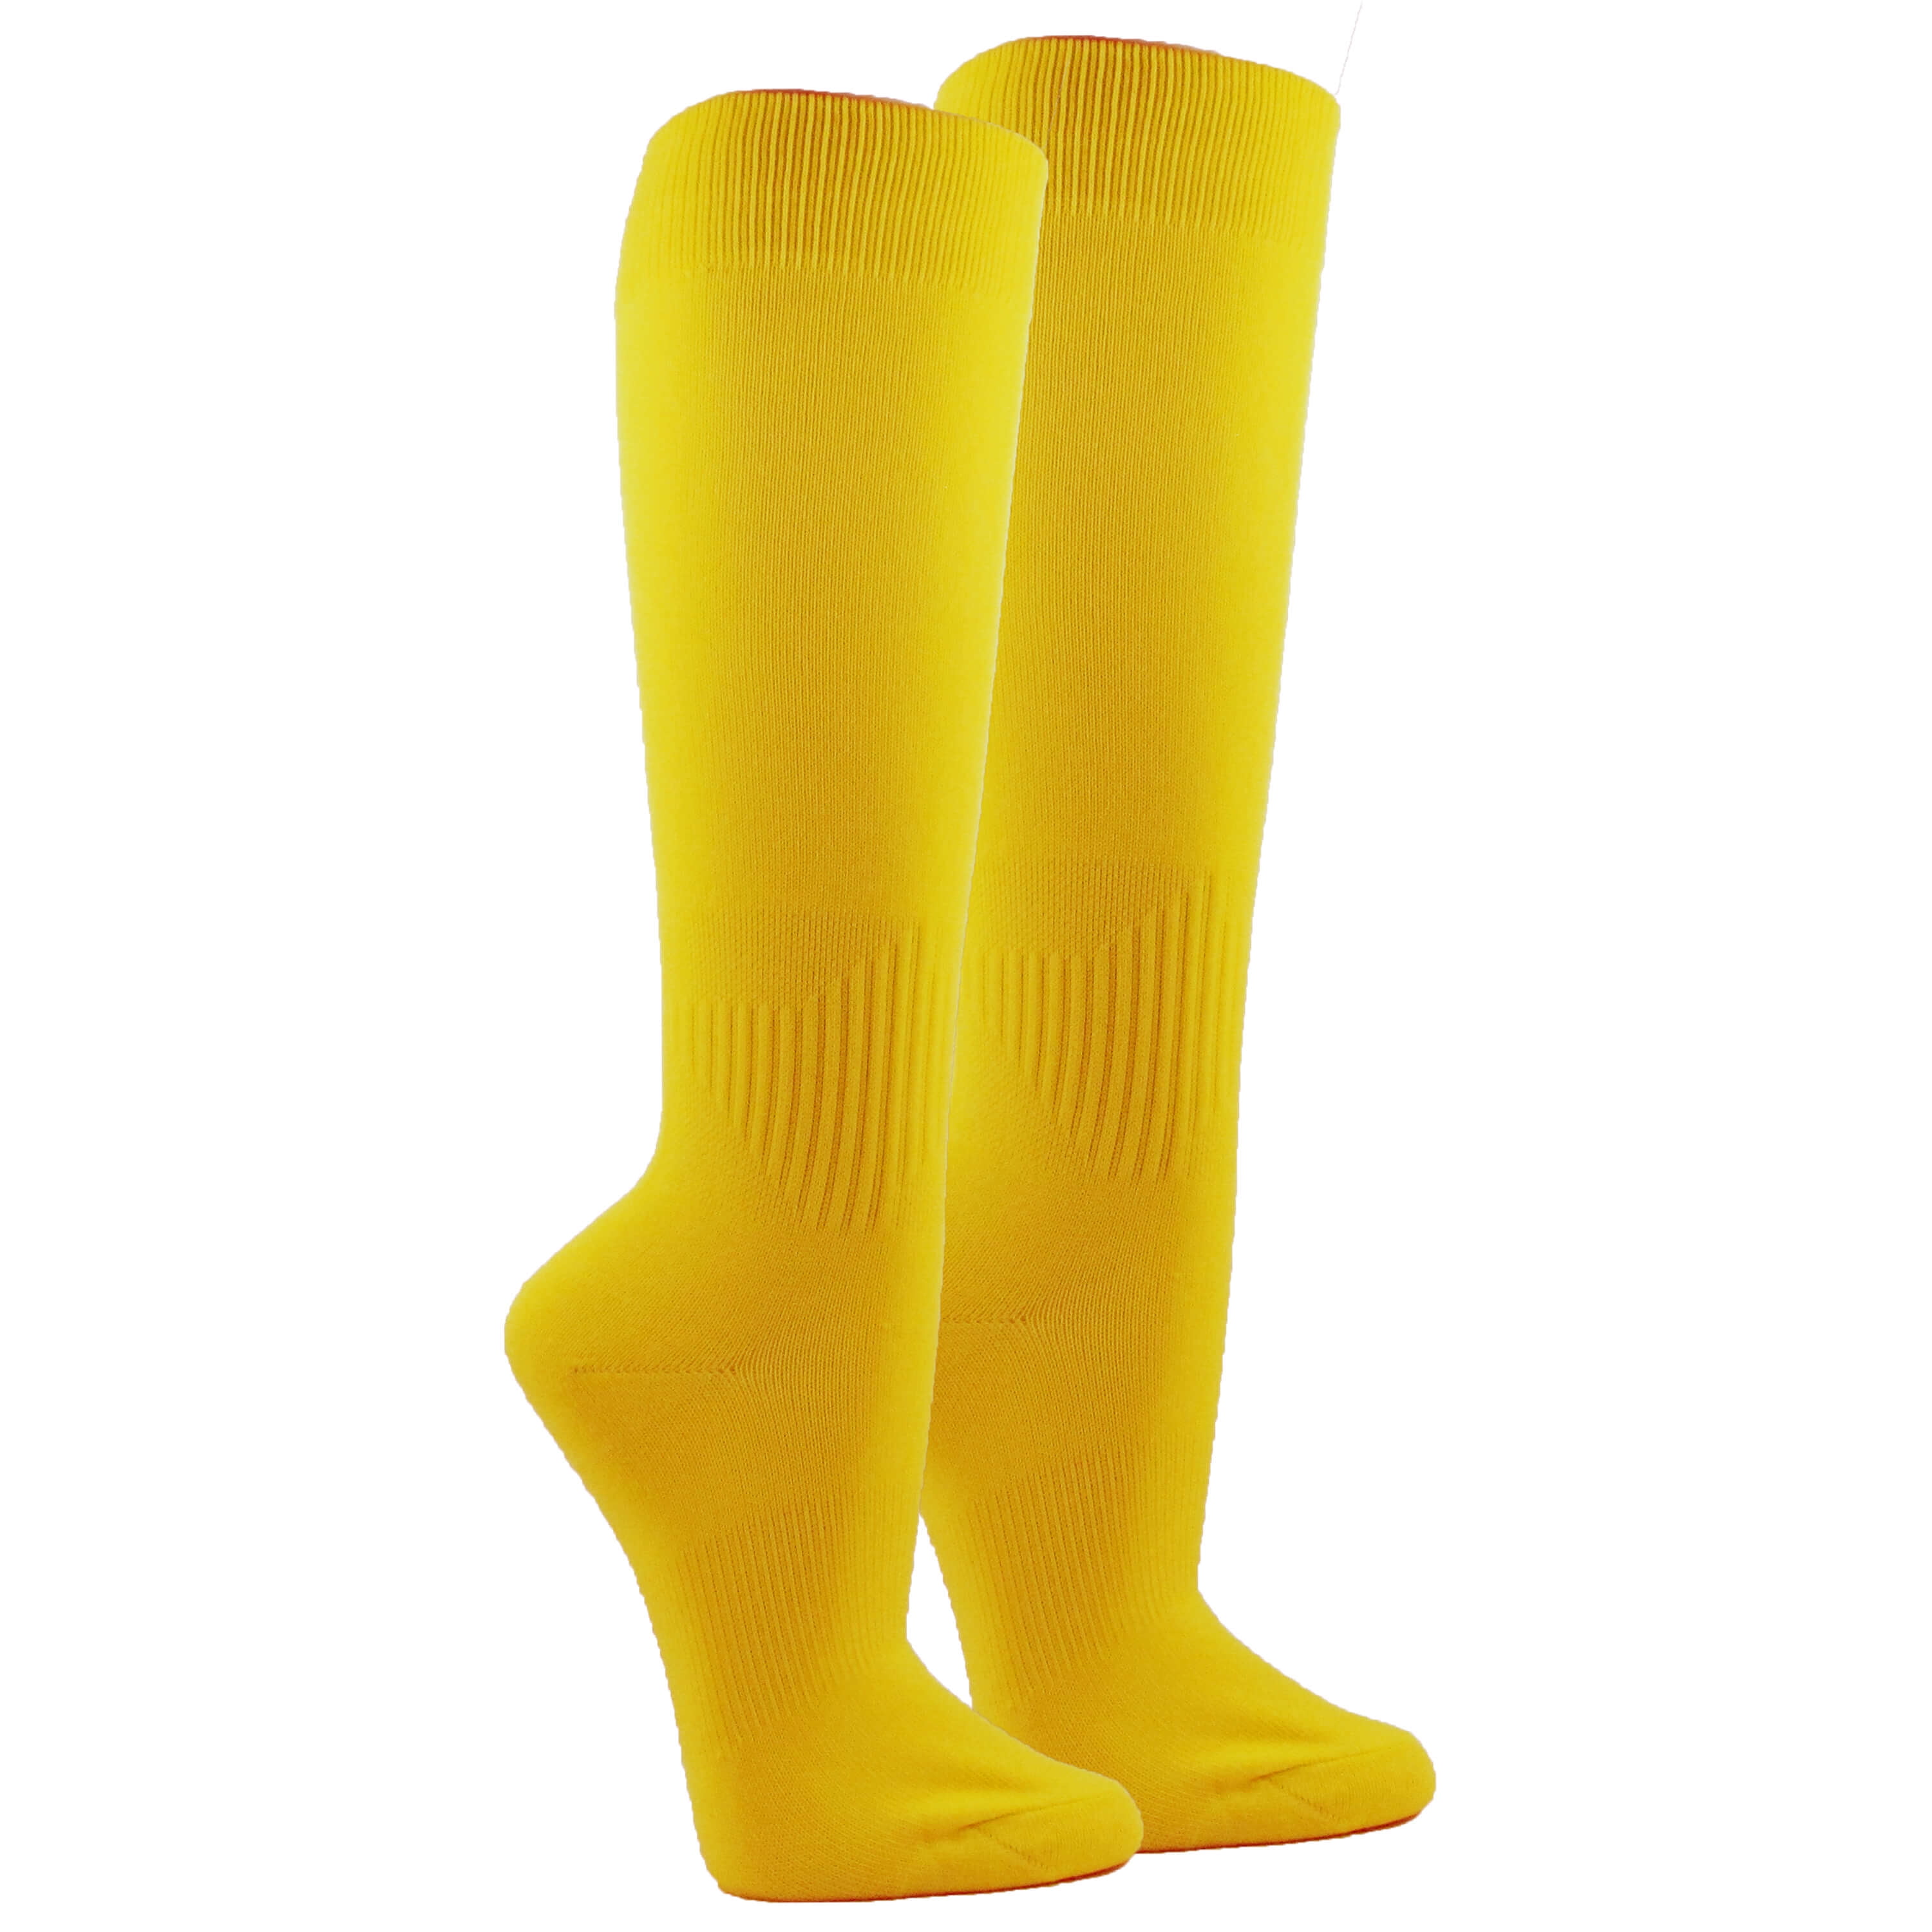 Couver Unisex Polyester Soccer Knee High Sports Athletic Socks, Neon Yellow  Medium